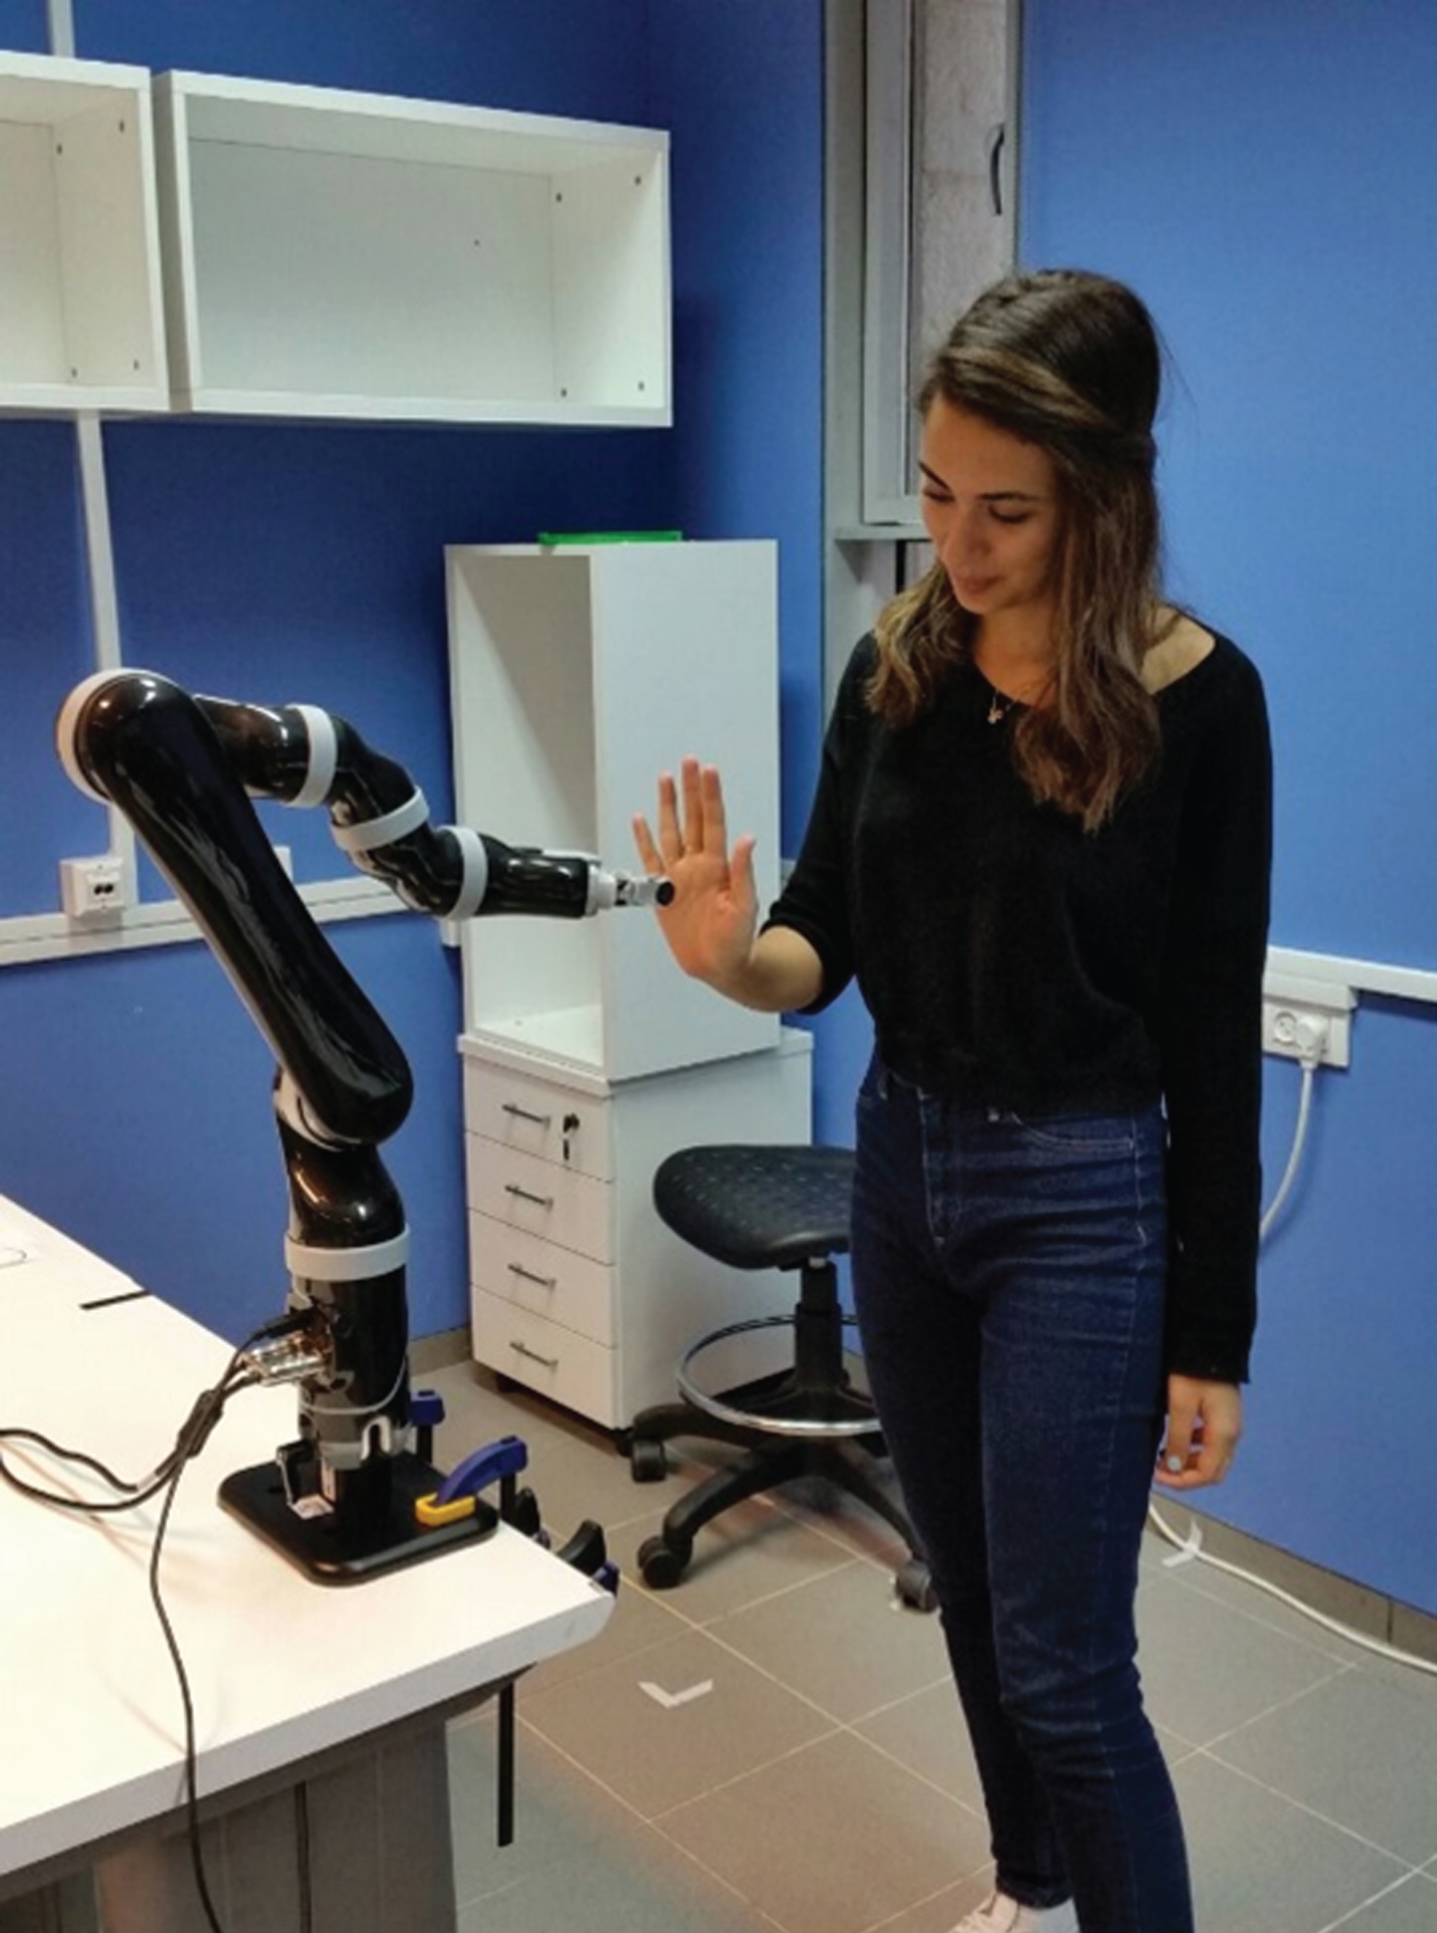 The experimental setup. Shown here is a participant playing the mirror game with the robotic partner.